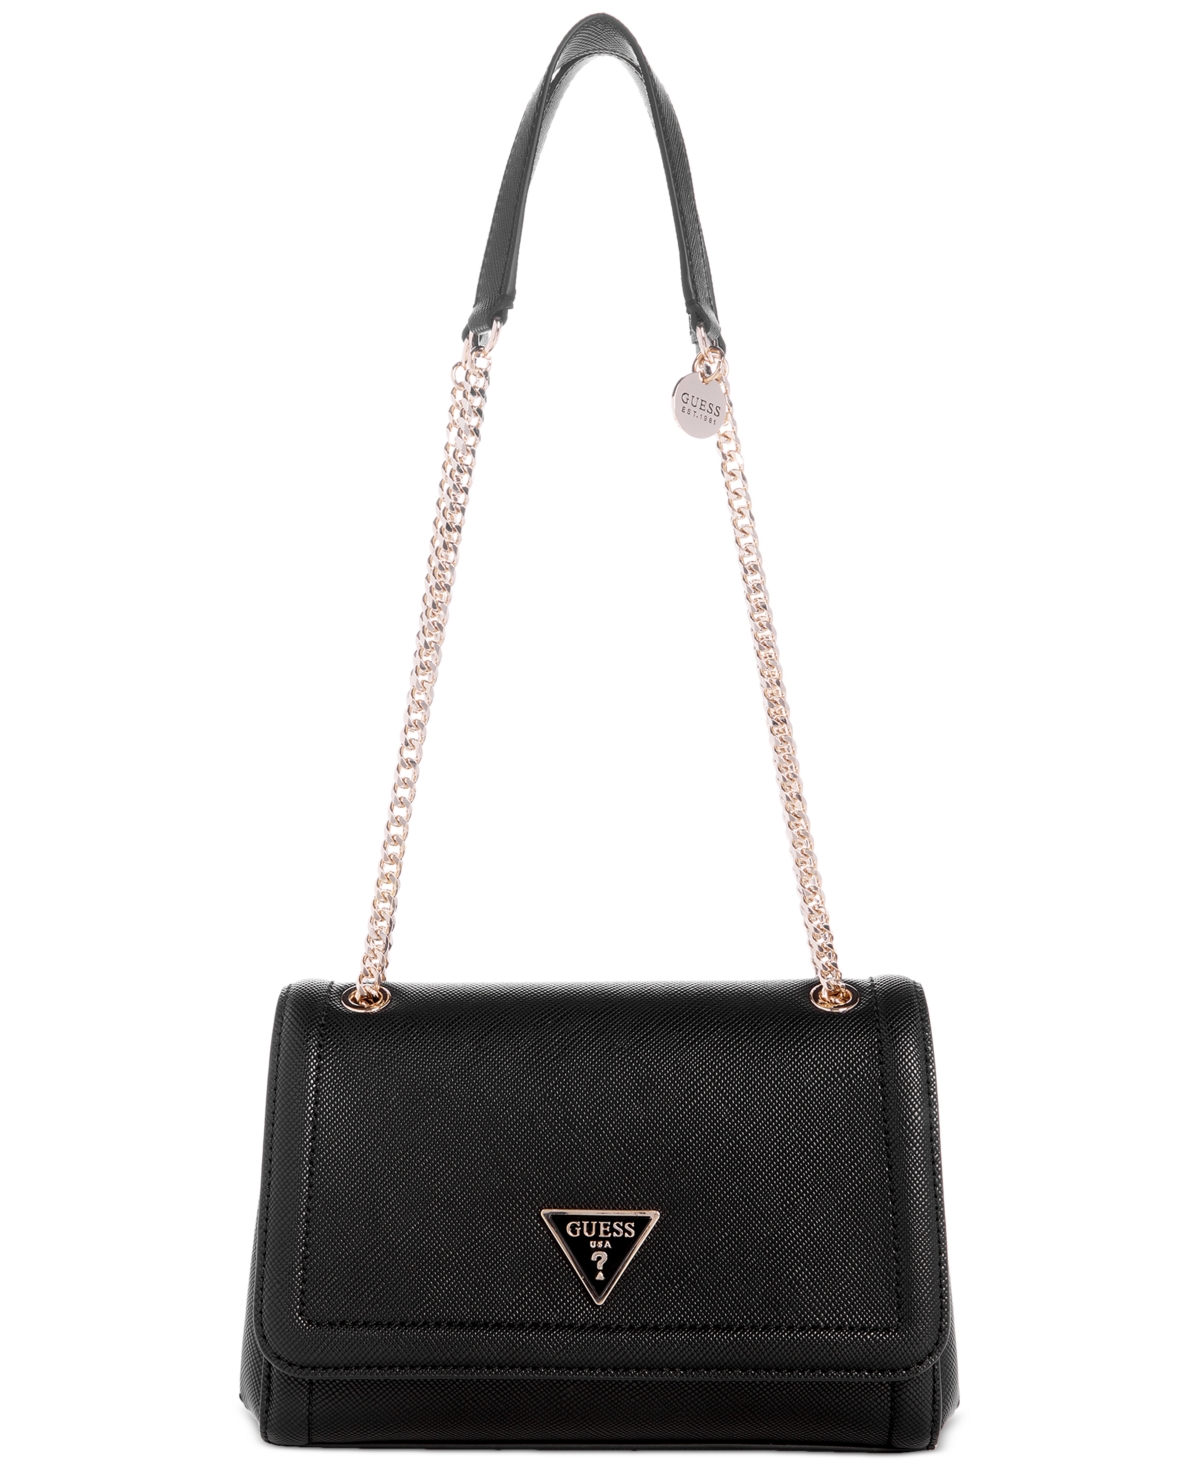 Guess Noelle Small Convertible Crossbody In Black